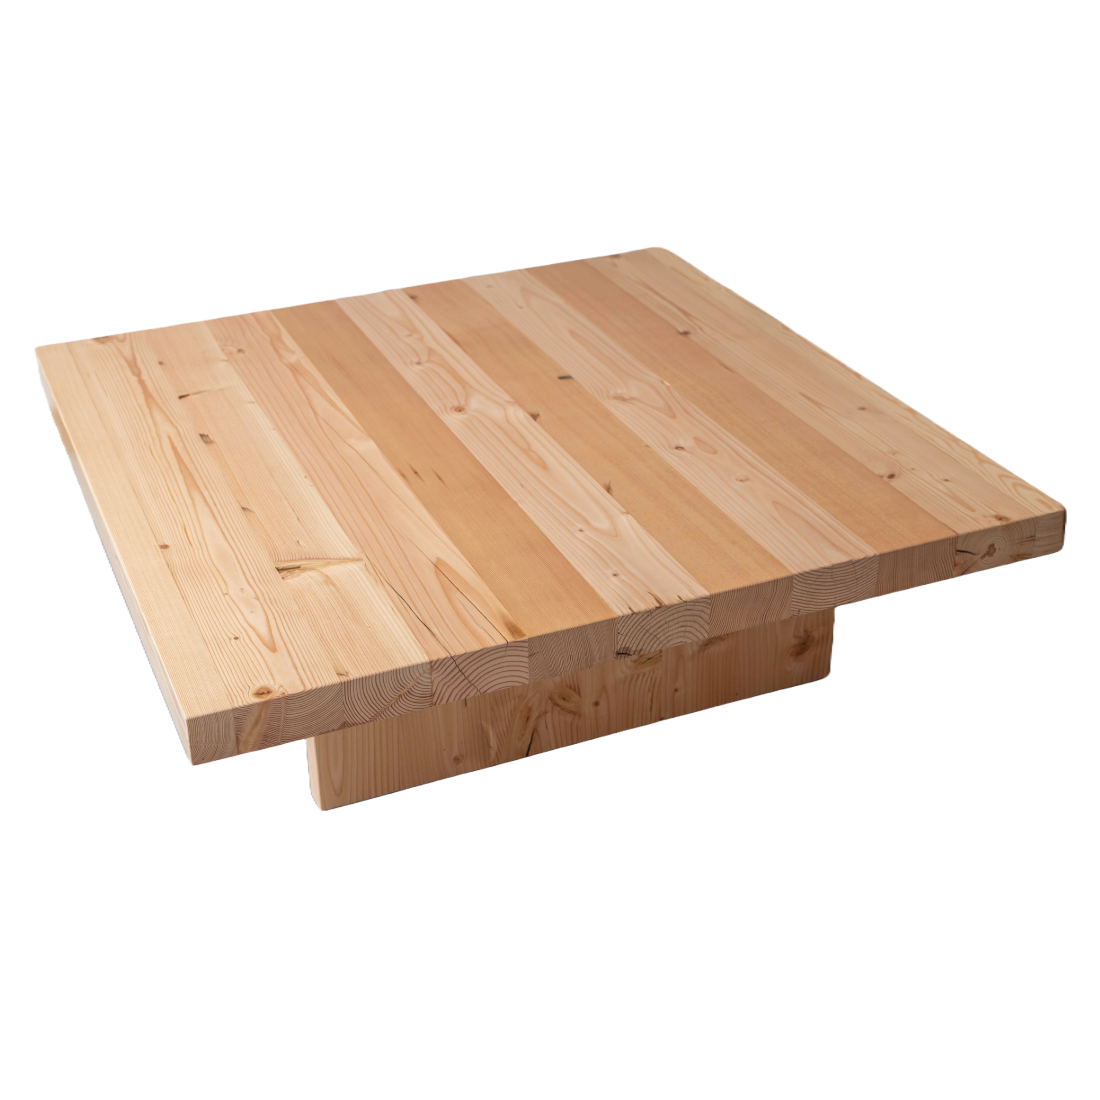 Exclusive timber coffee table, get it online. Or visit us in San Diego - Old Fashioned Lumber